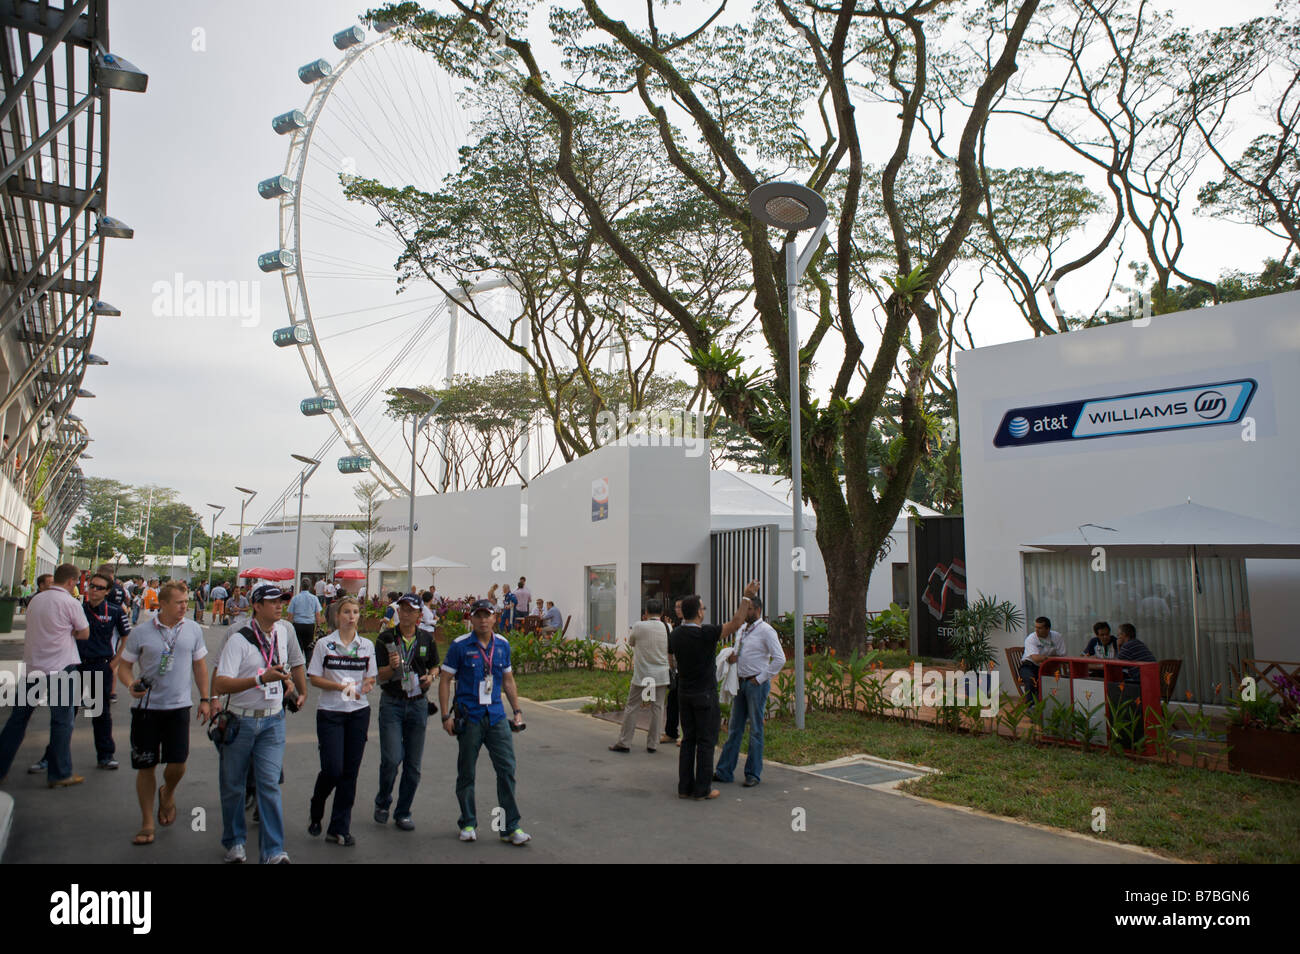 Paddock club f1 hi-res stock photography and images - Alamy